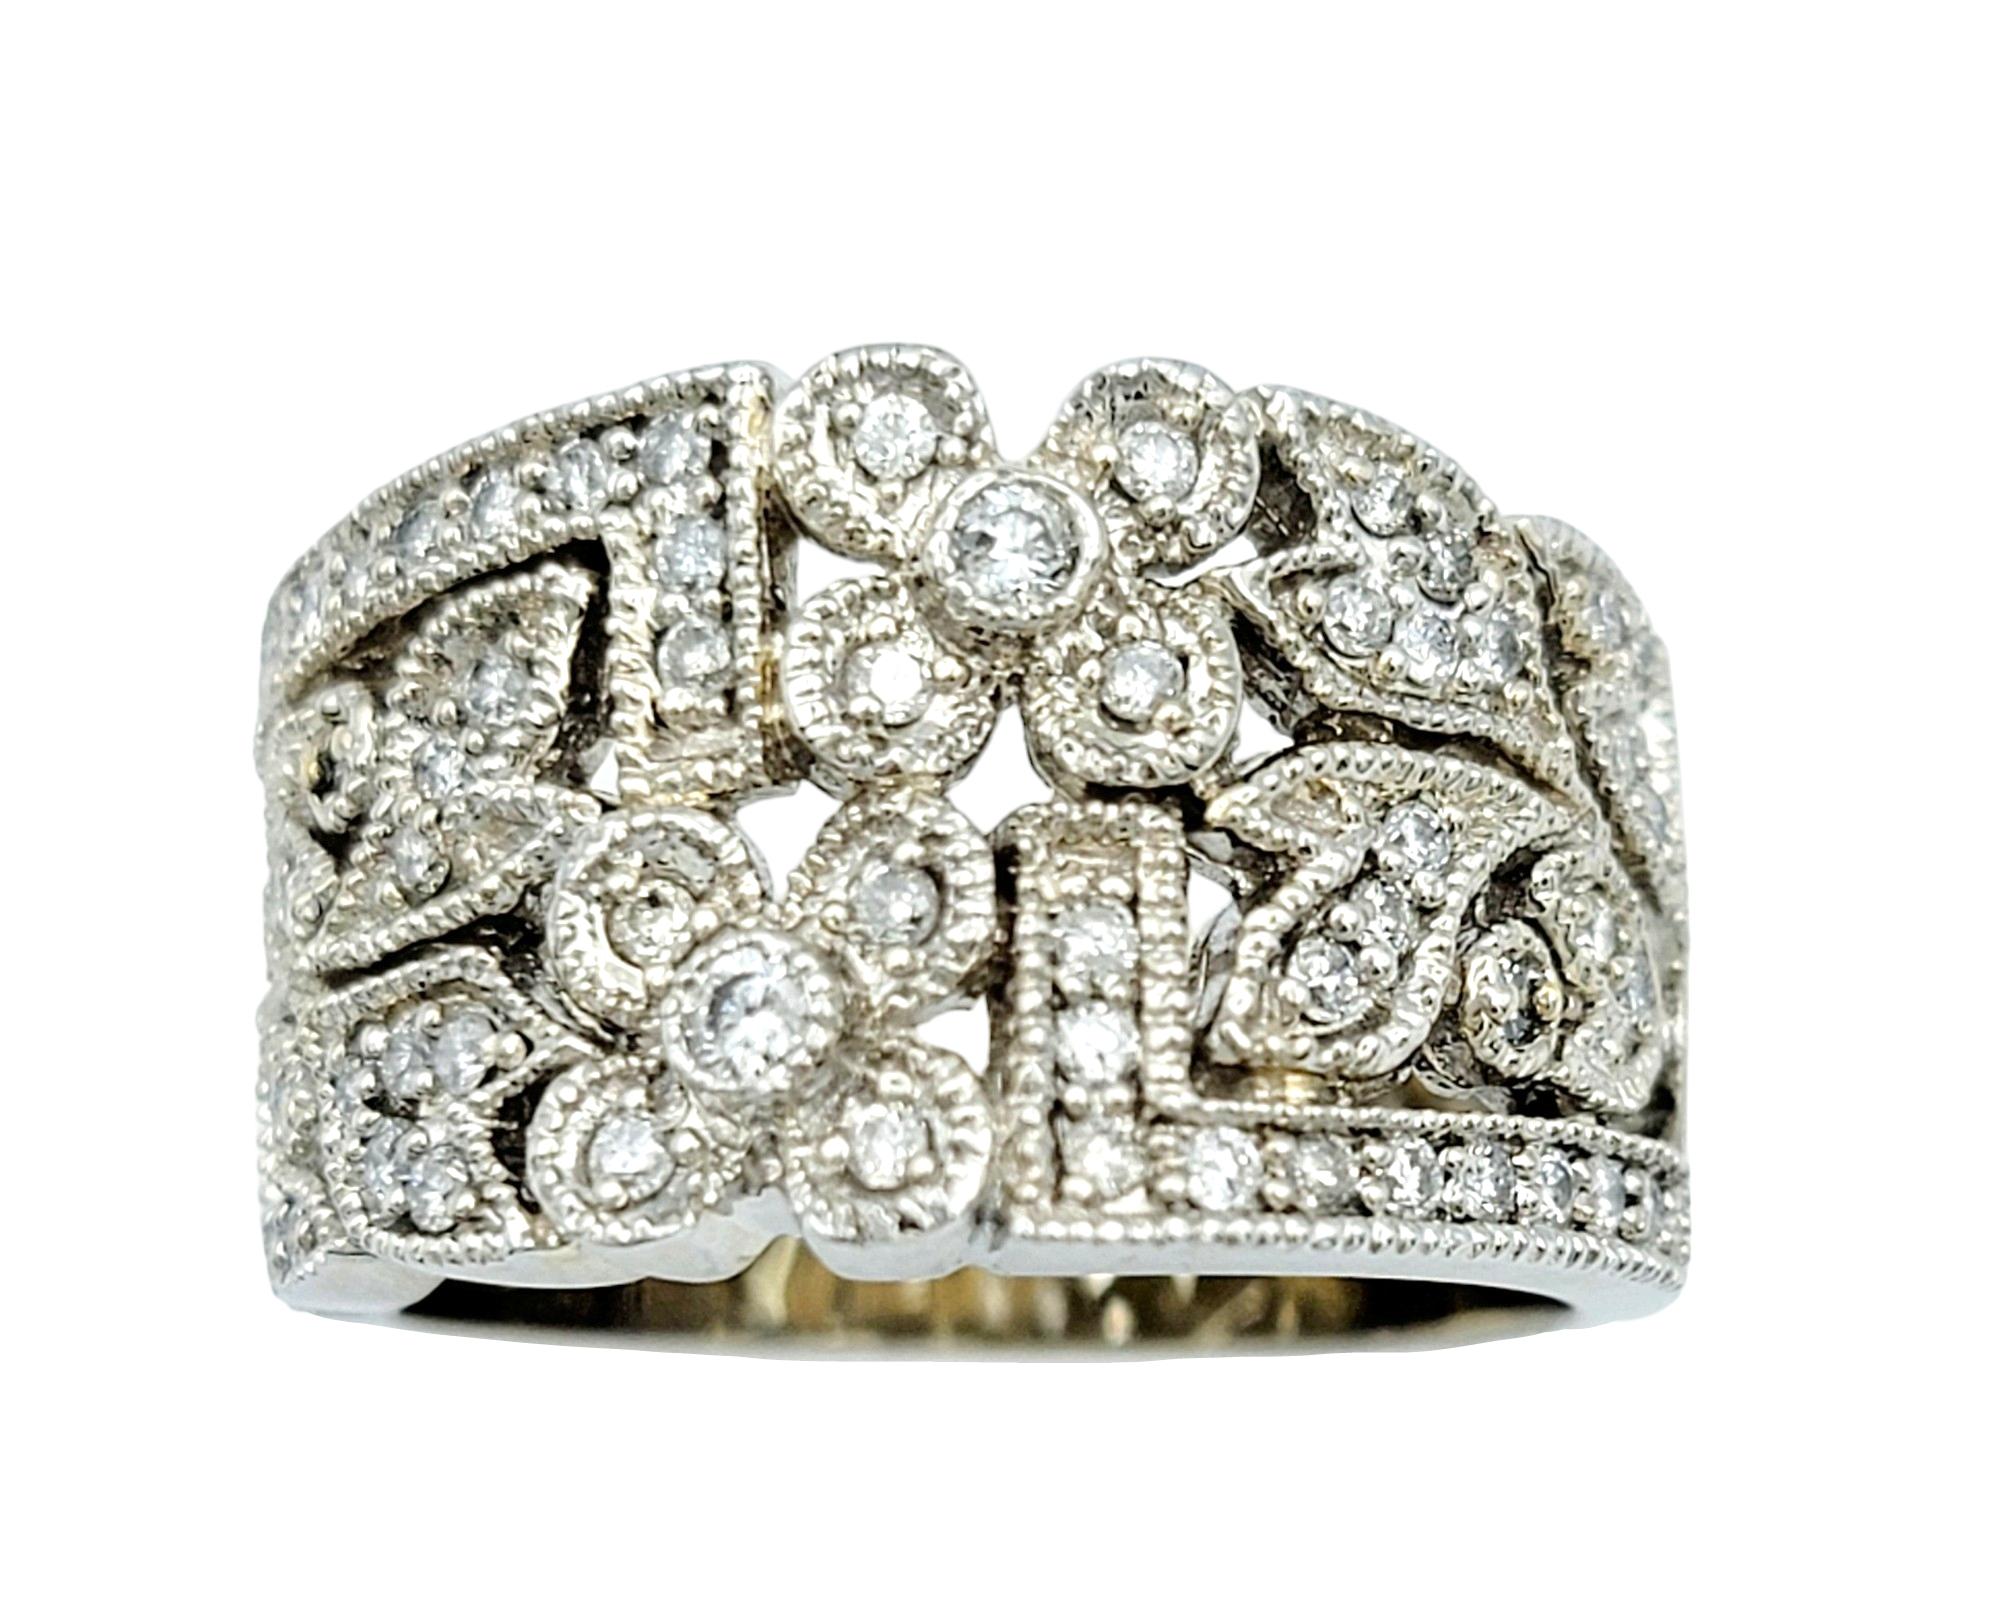 Ring Size: 7.25

The Effy band ring, crafted in elegant 14 karat white gold, features a captivating design inspired by nature's beauty. Adorned with a delicate arrangement of flowers and leaves, this ring exudes timeless charm and sophistication.